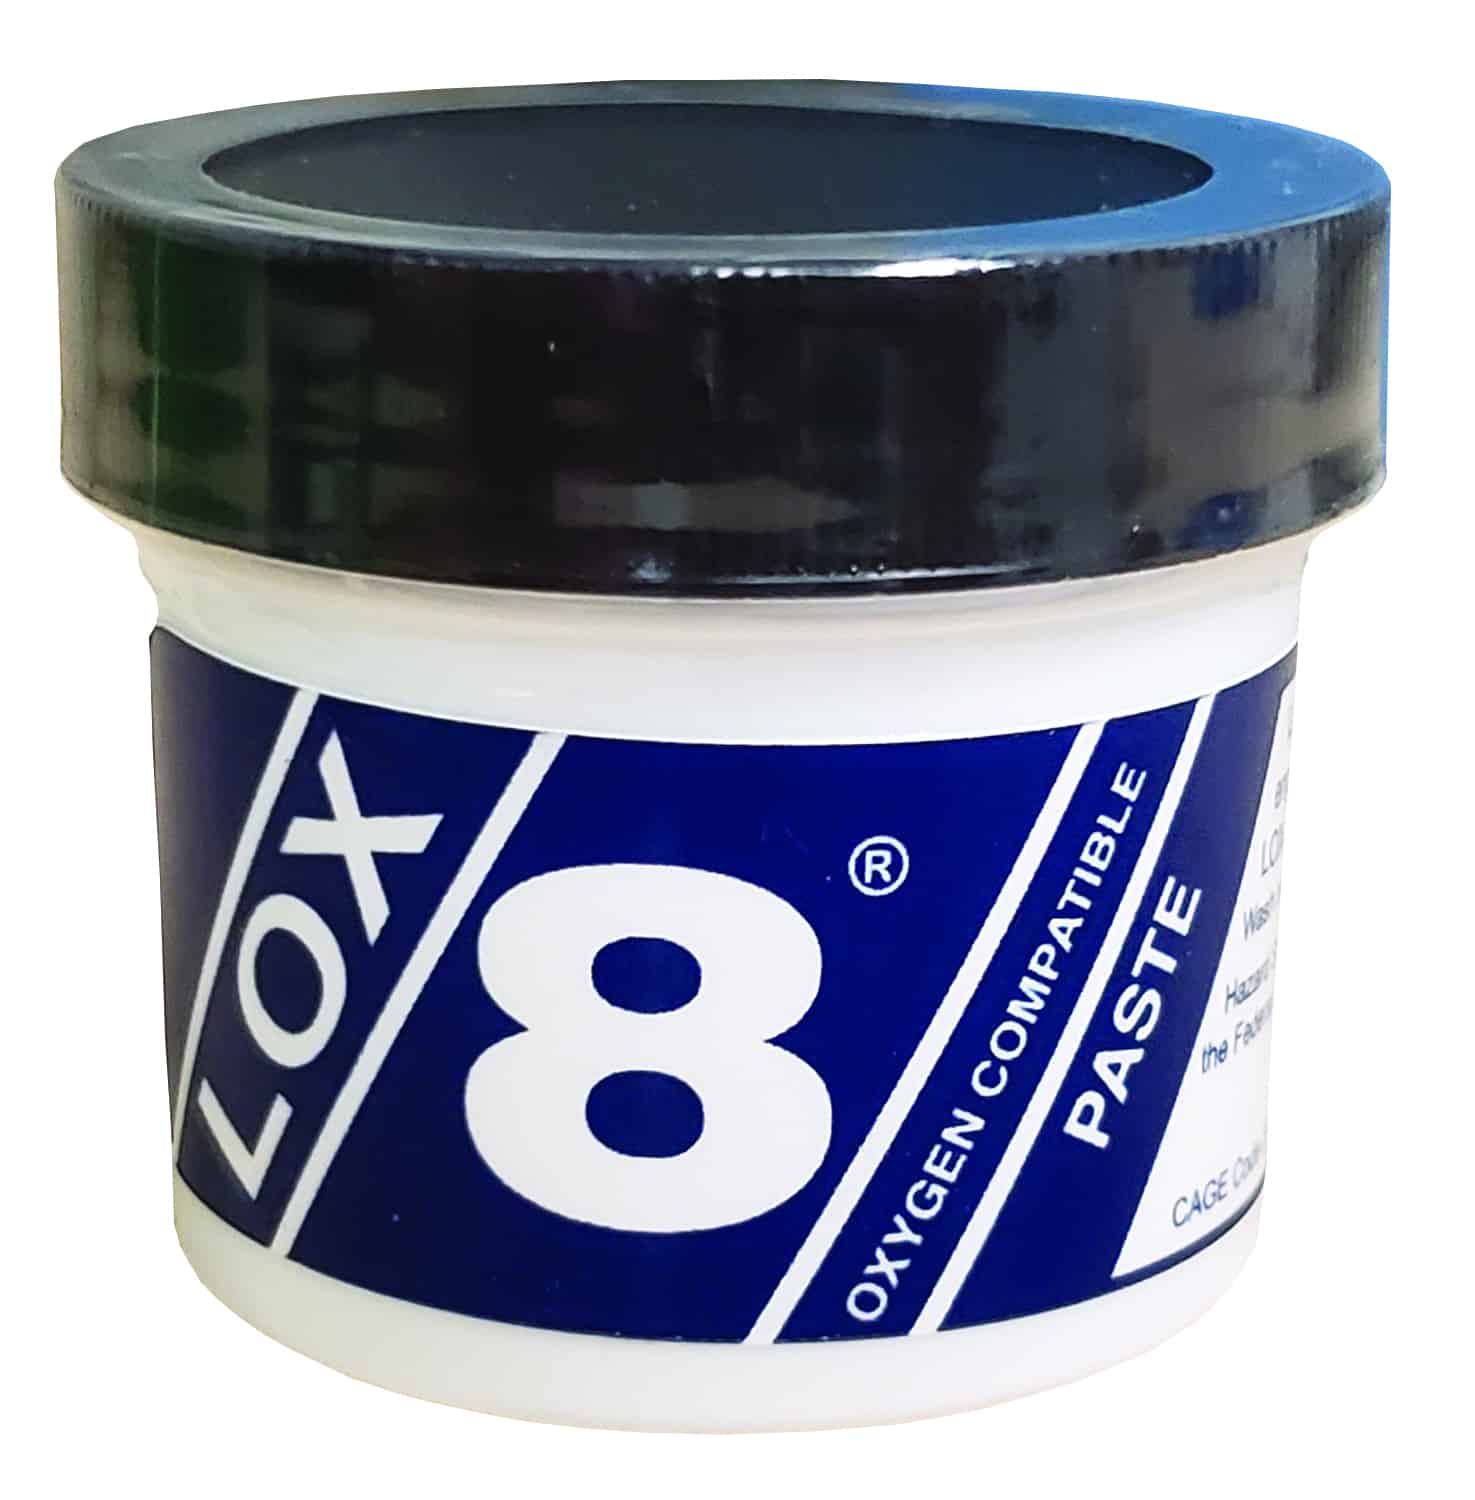 LOX-8 Paste 100 Gram Jar with Seal CMYK 5 Clipped